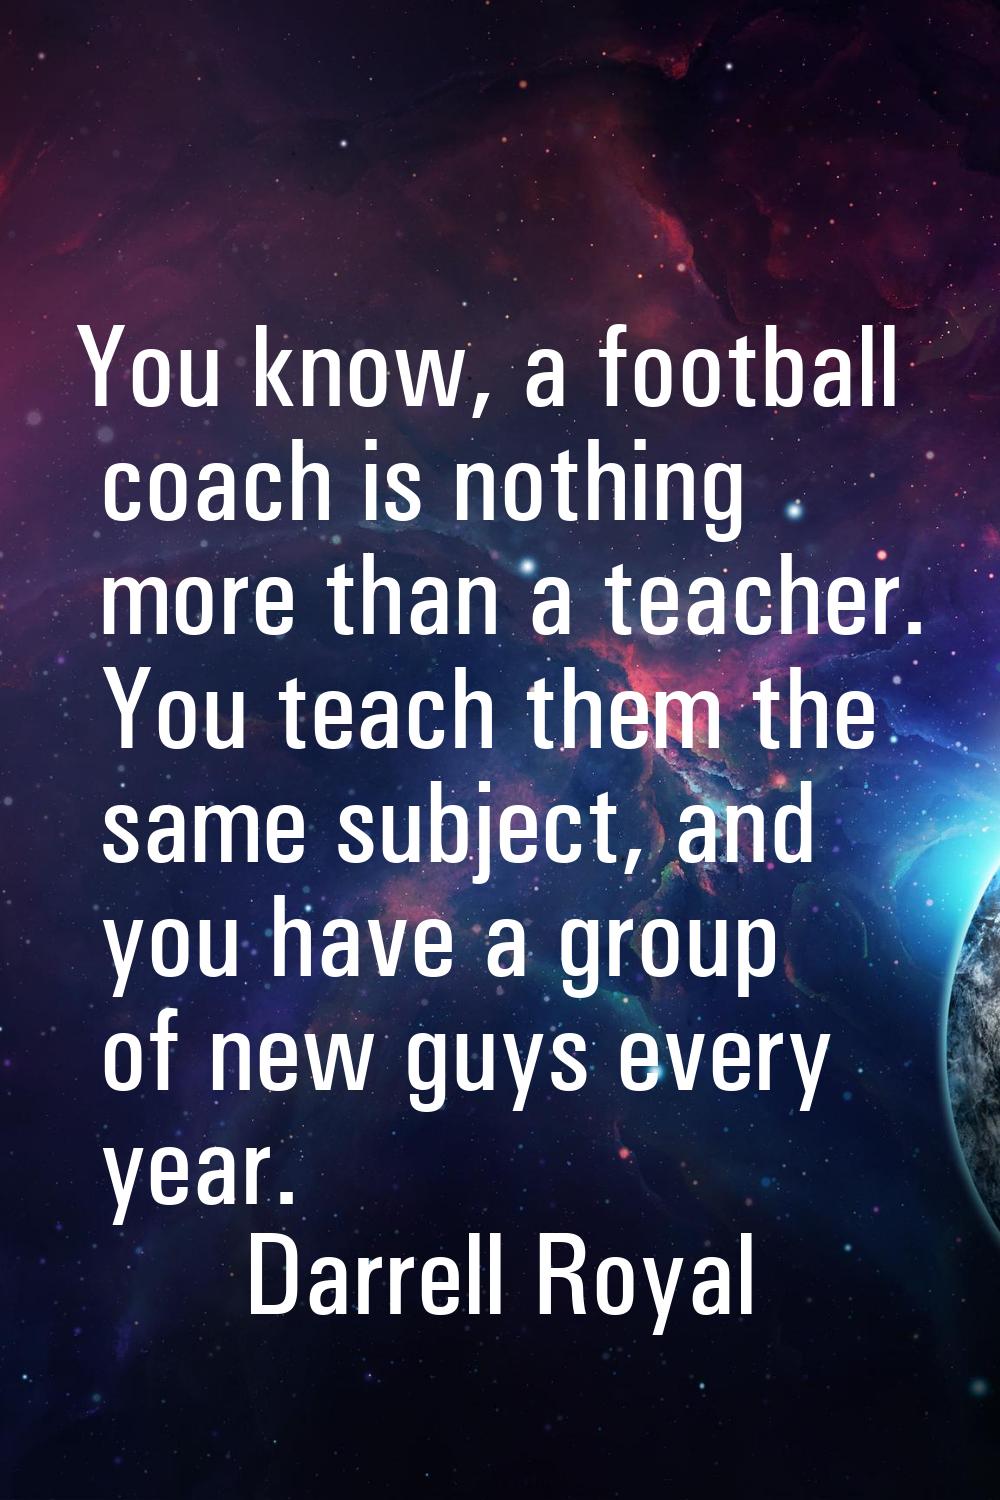 You know, a football coach is nothing more than a teacher. You teach them the same subject, and you